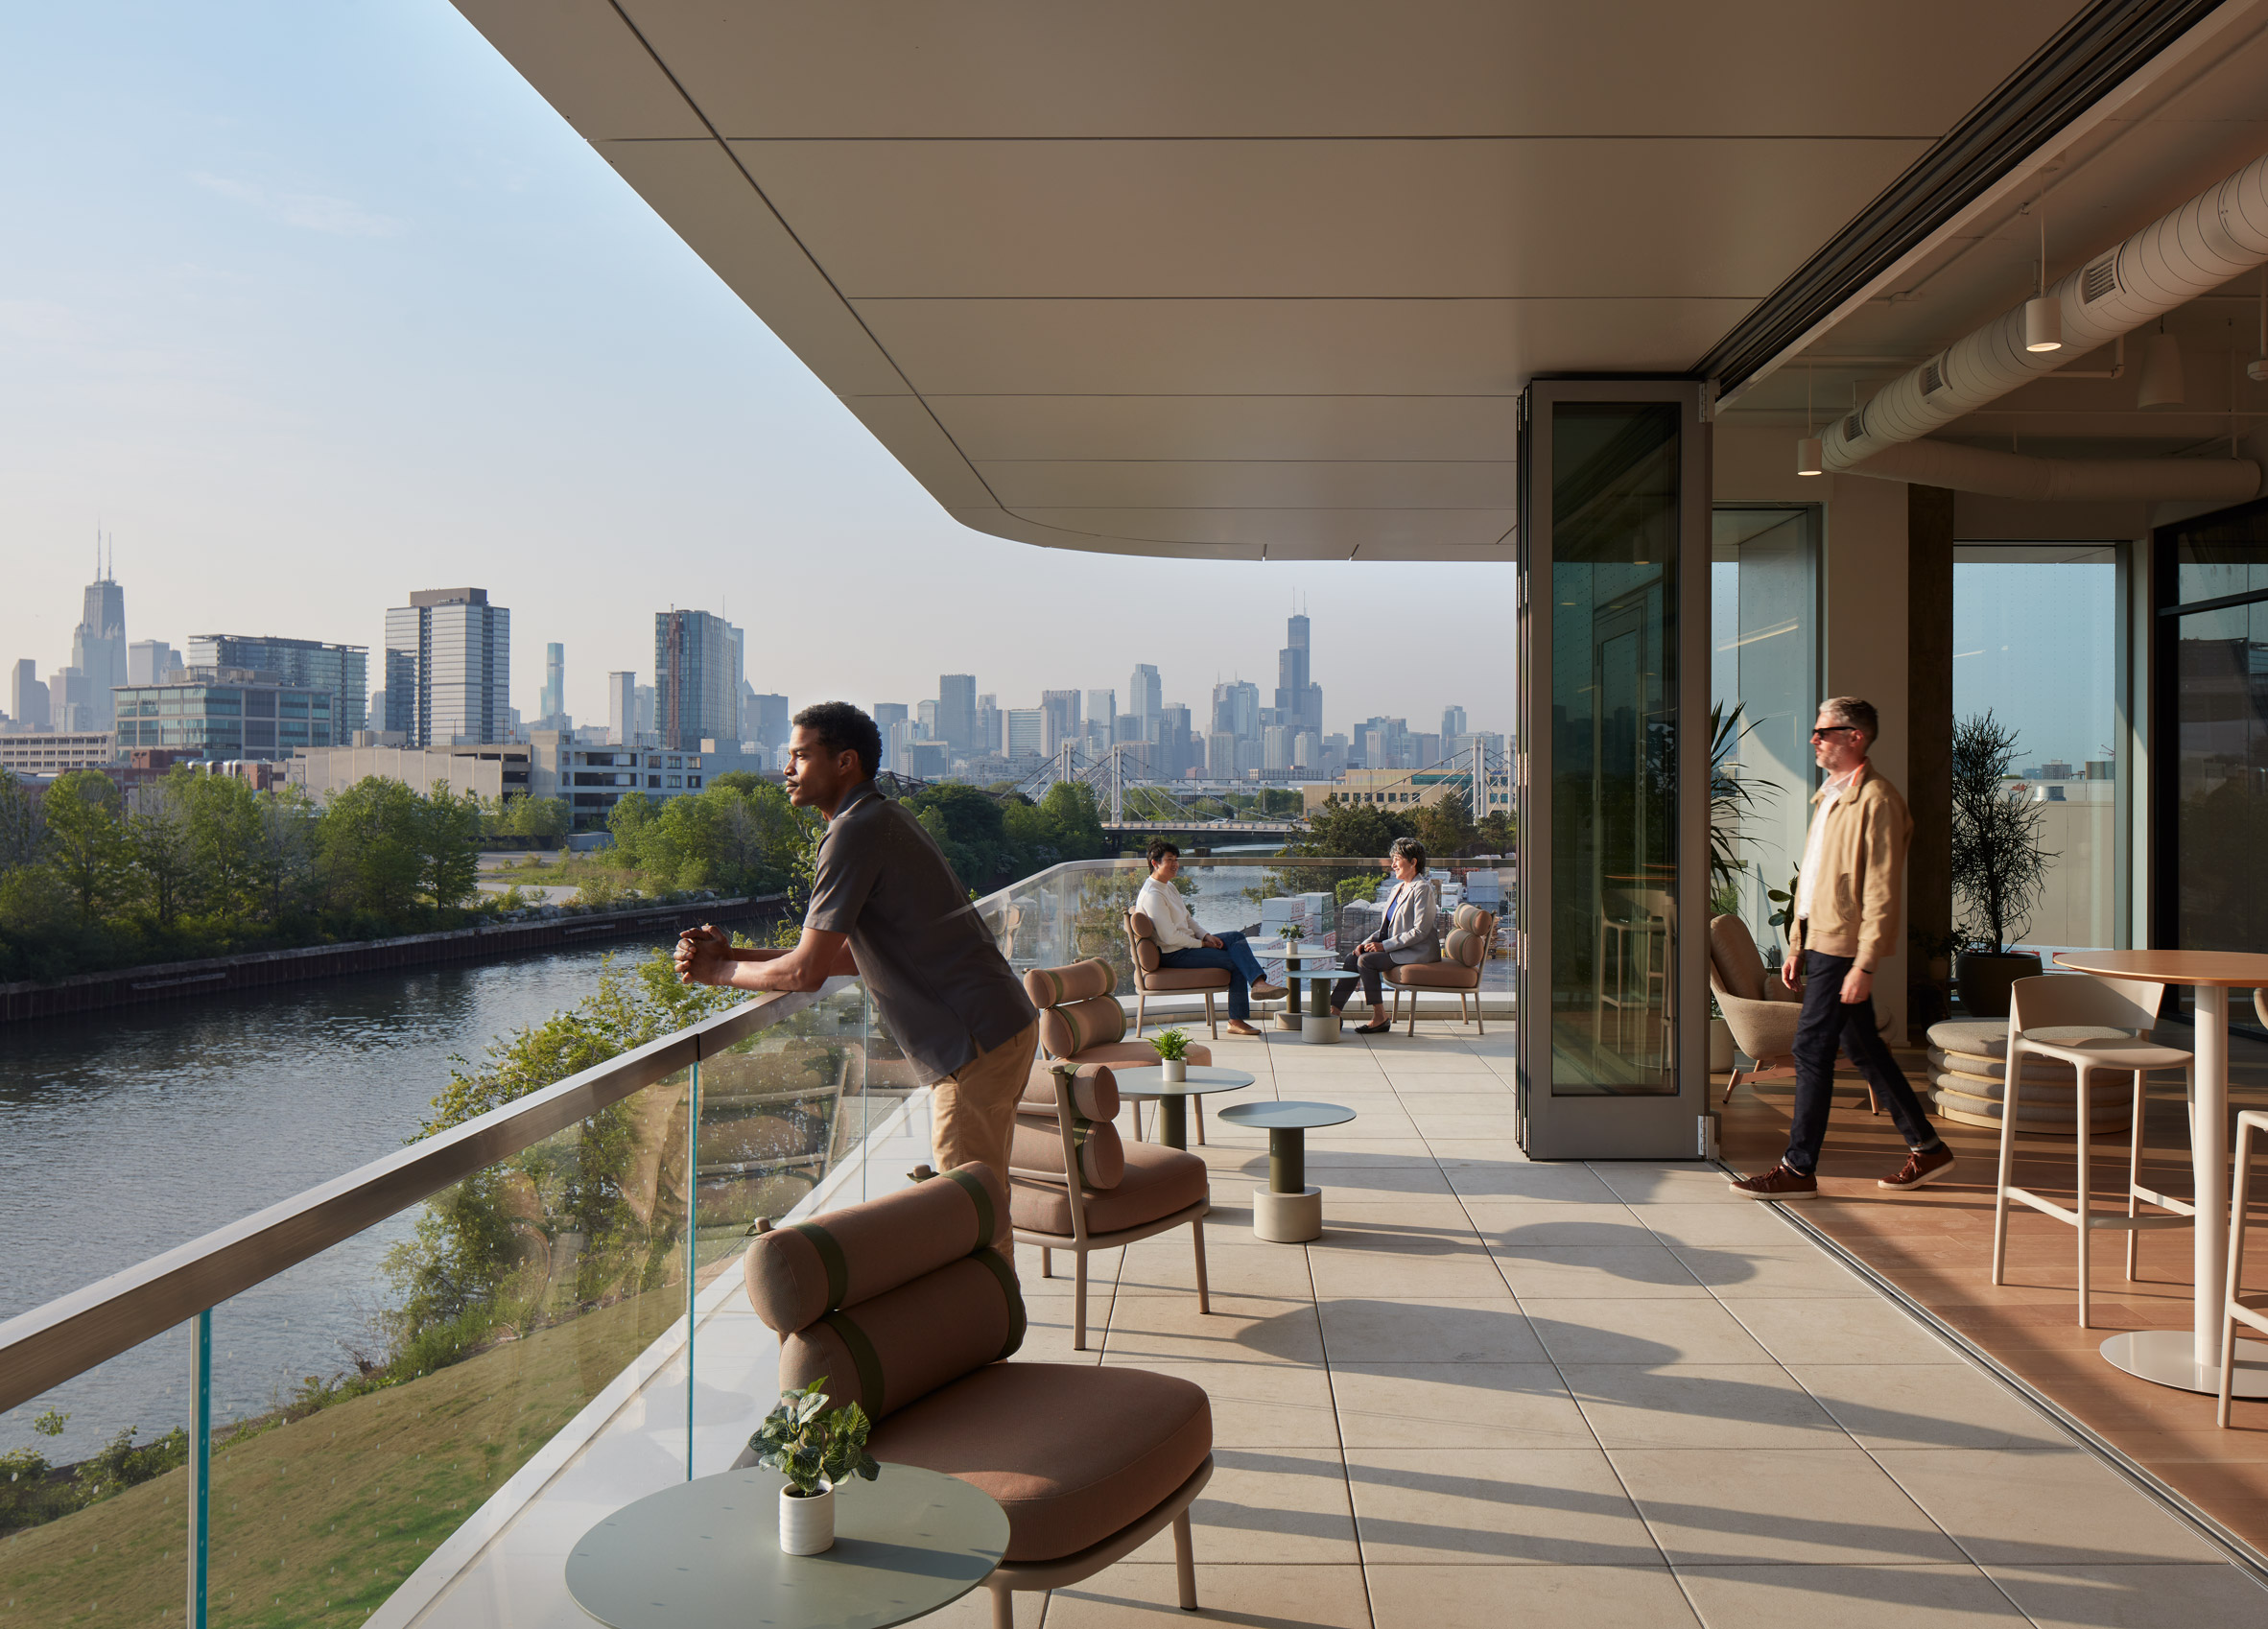 Outdoor terrace with view of Chicago skyline